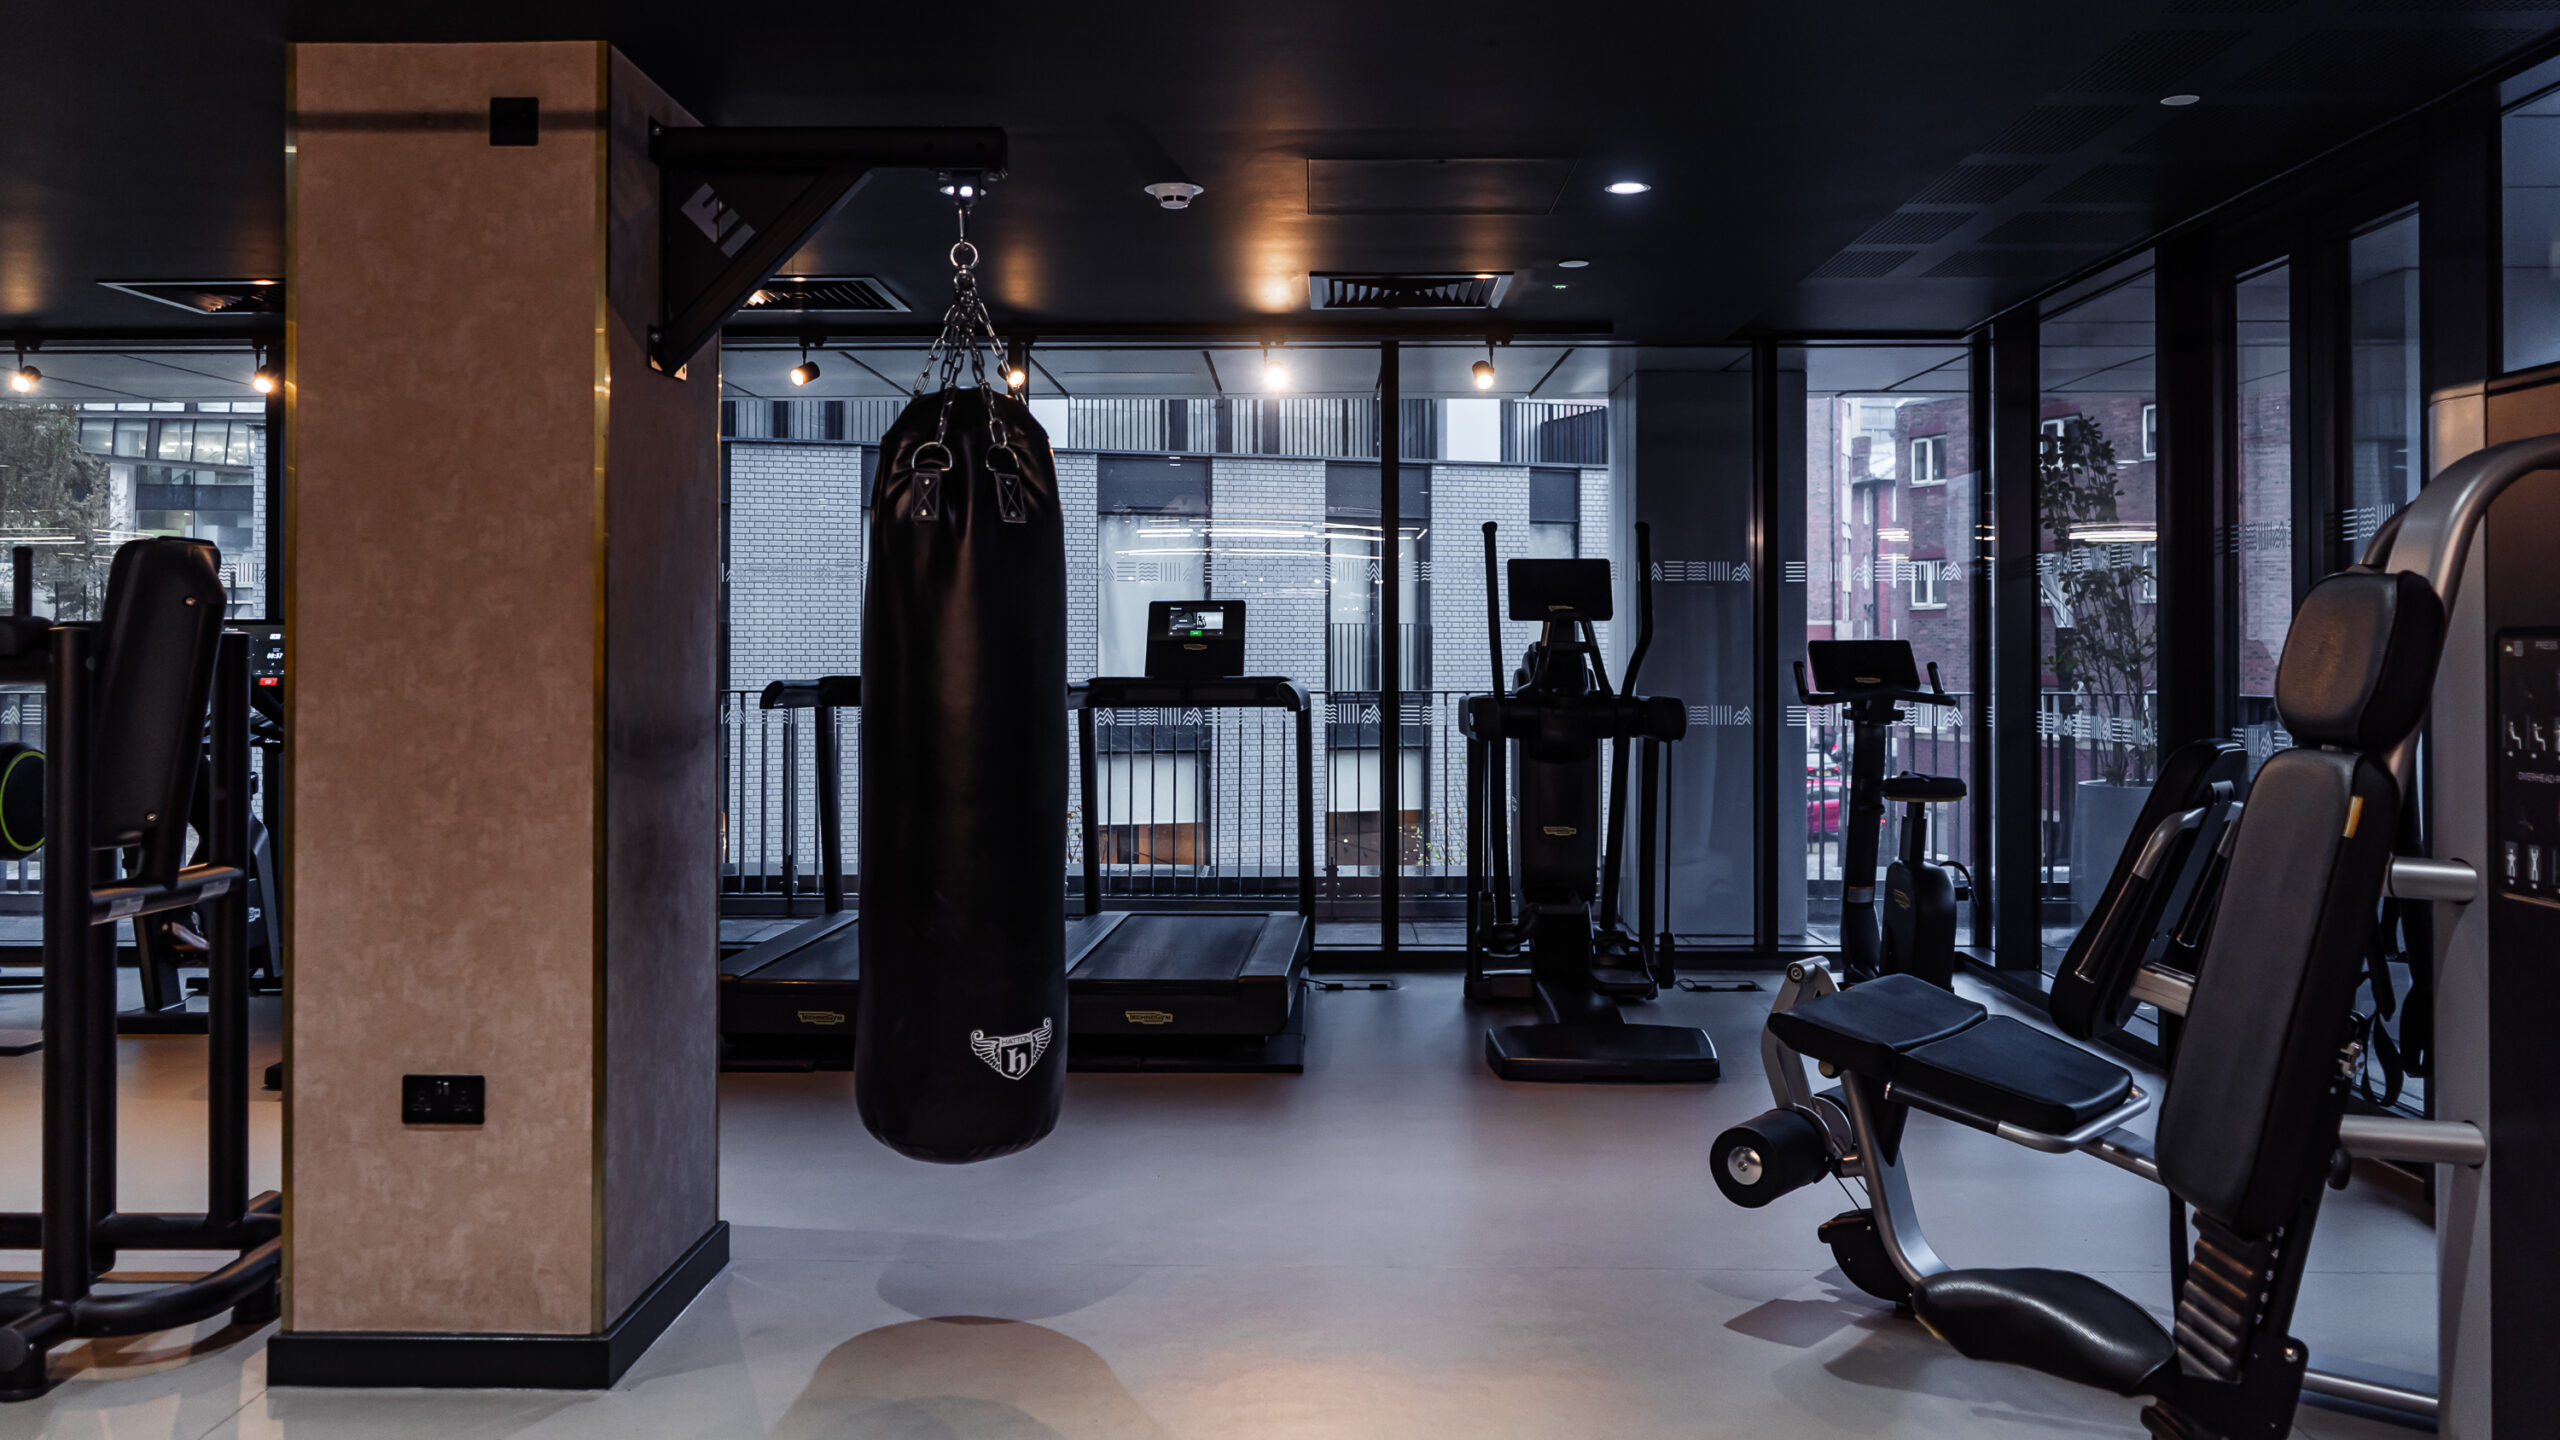 The gym at the Manchester apartment, which is off Angel Meadows